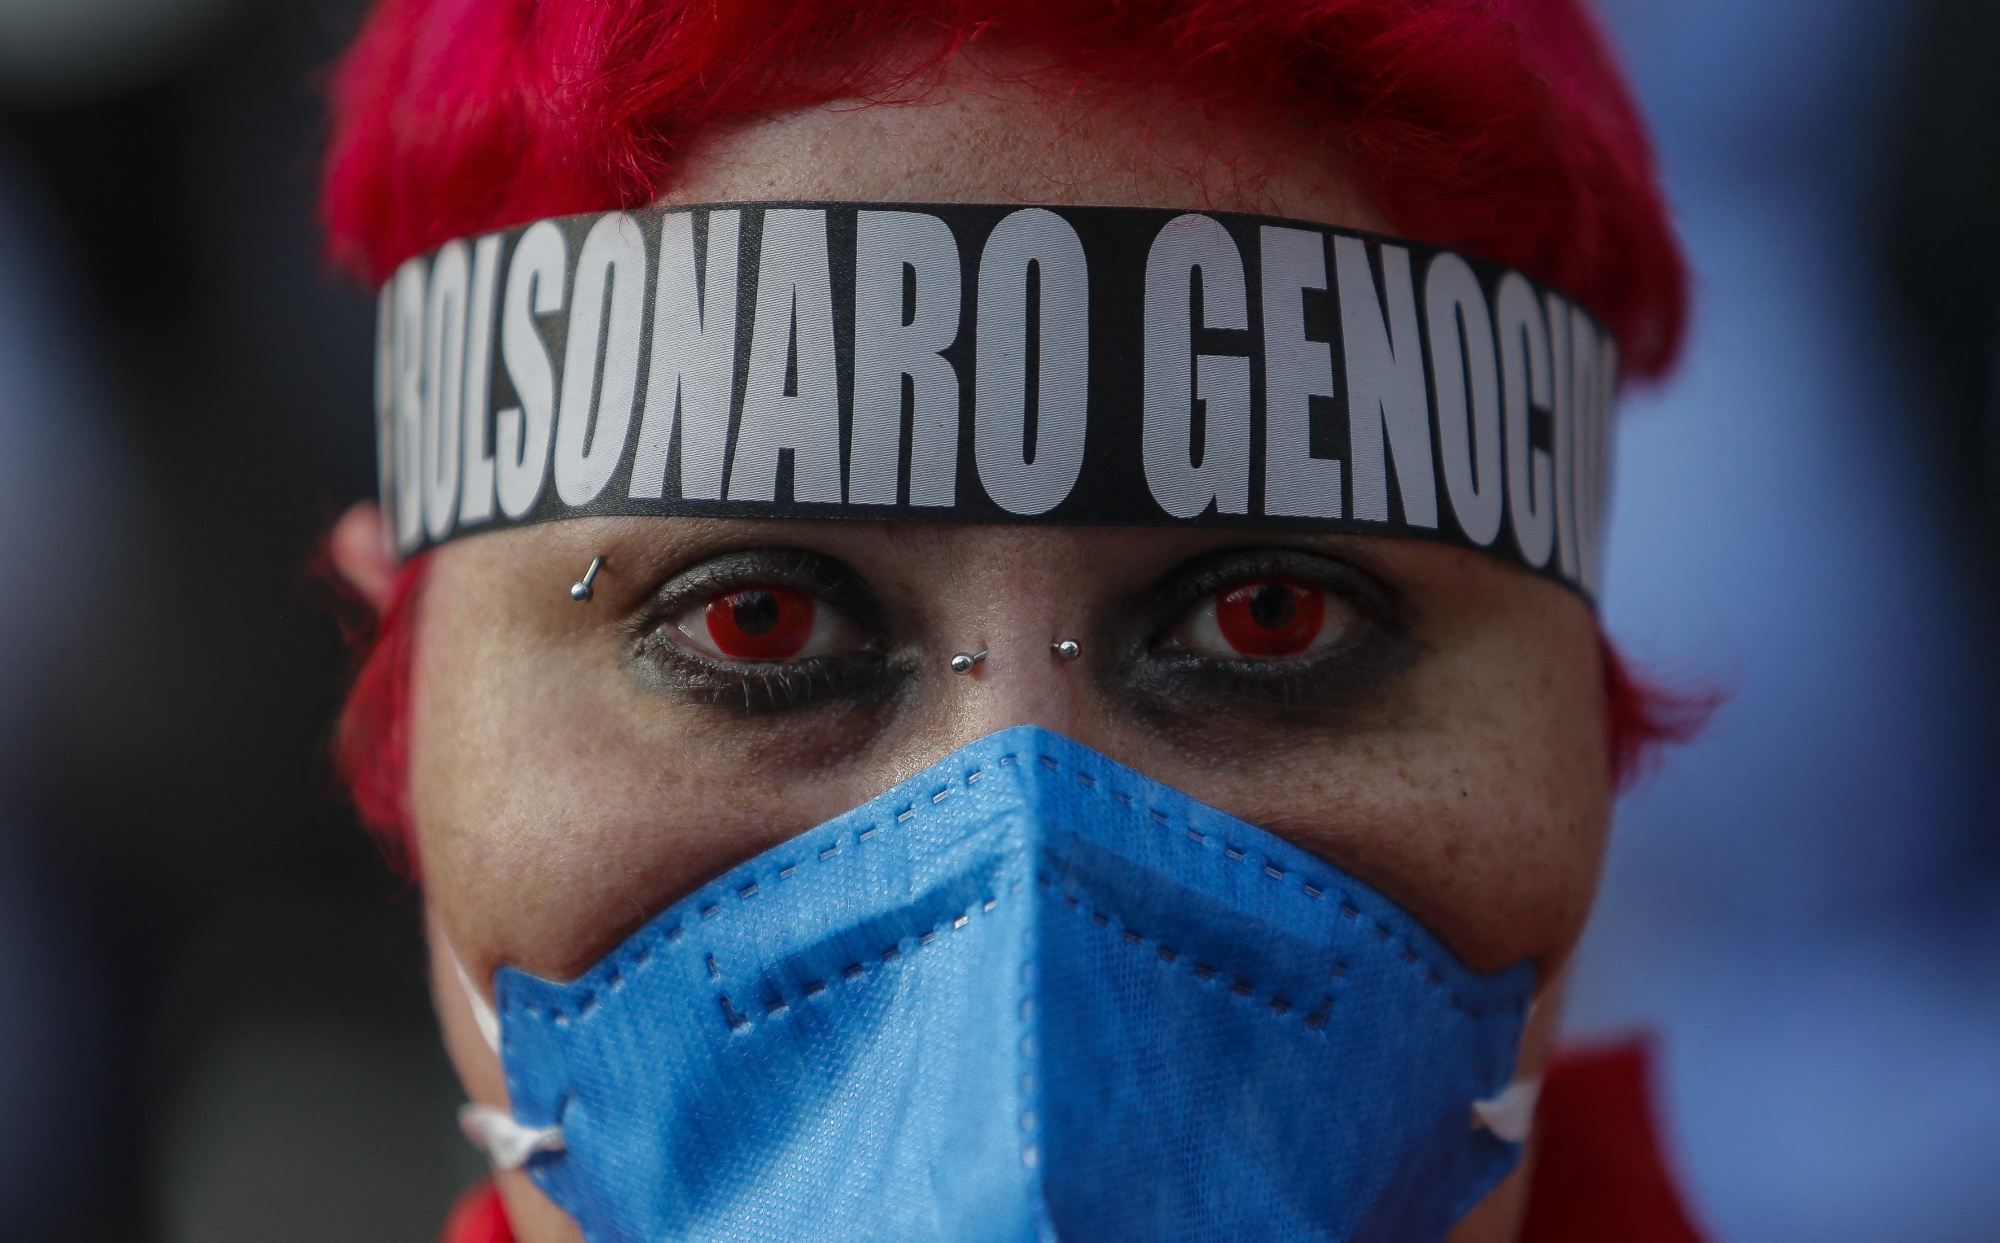 Brazilians have already protested Bolsonaro’s handling of the pandemic.&nbsp;